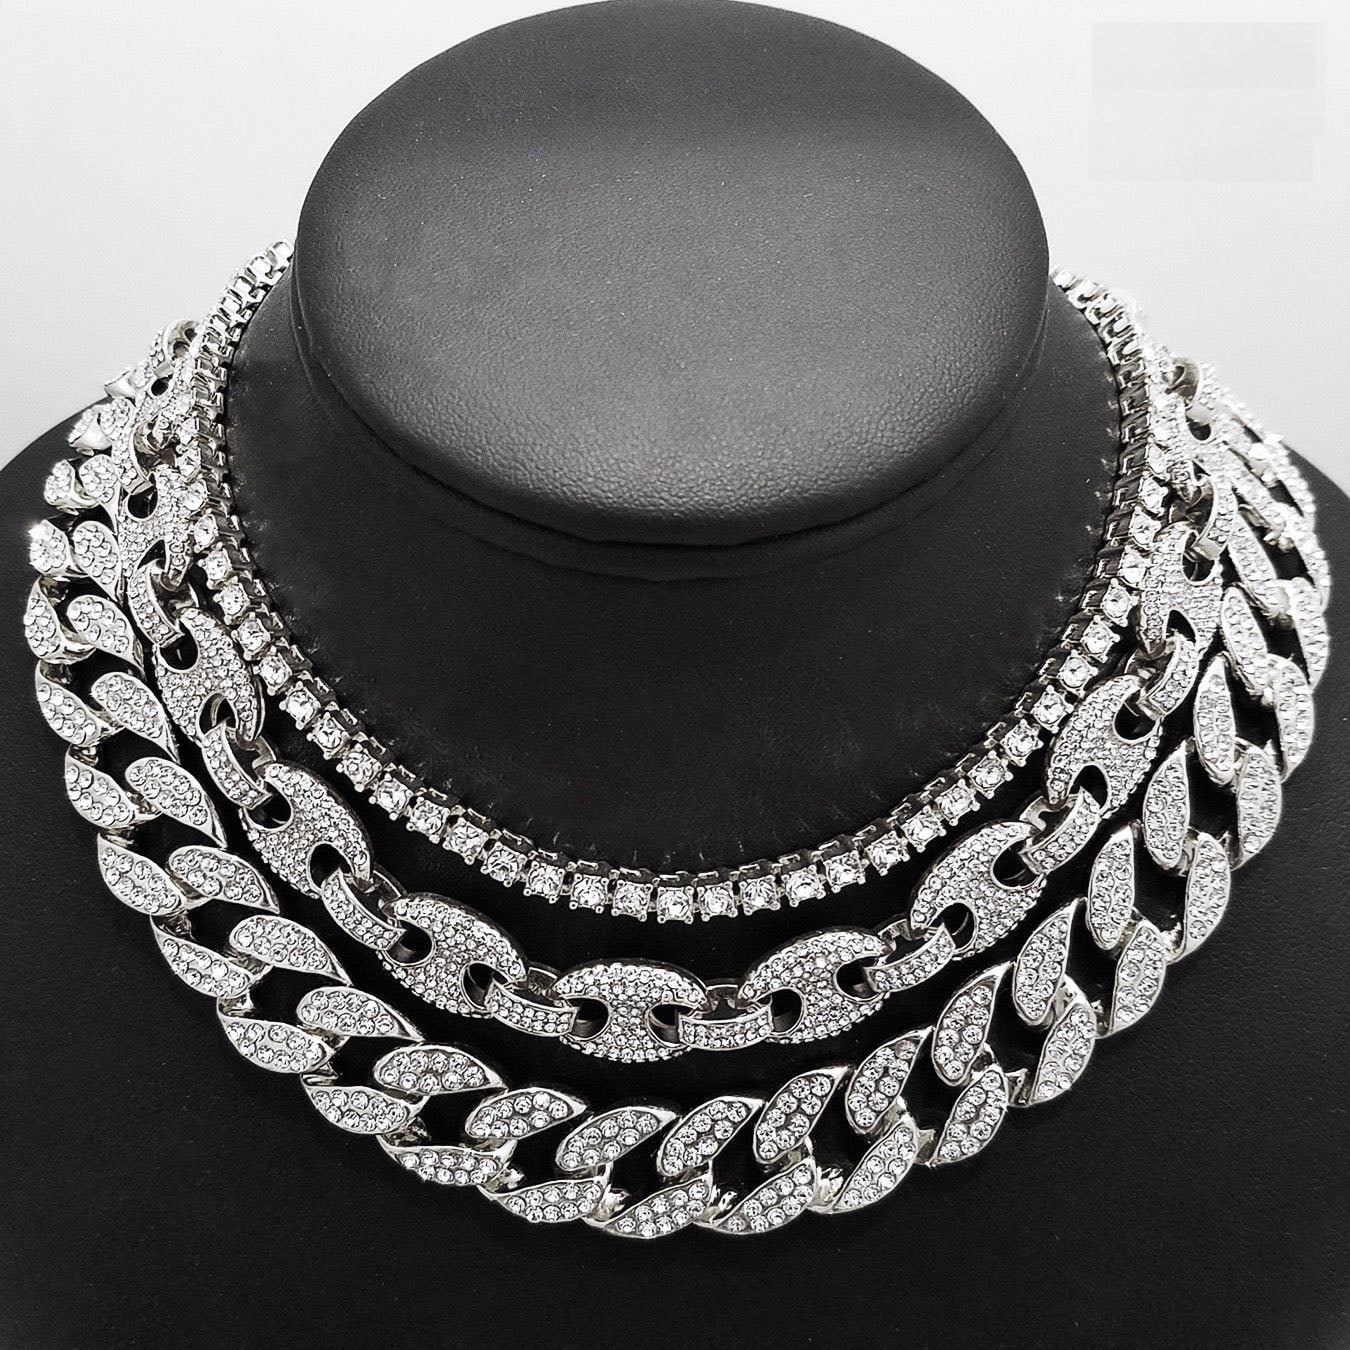 Hip Hop Iced out Large Saw Pendant & 18" Iced Rollie Link Choker Chain Necklace